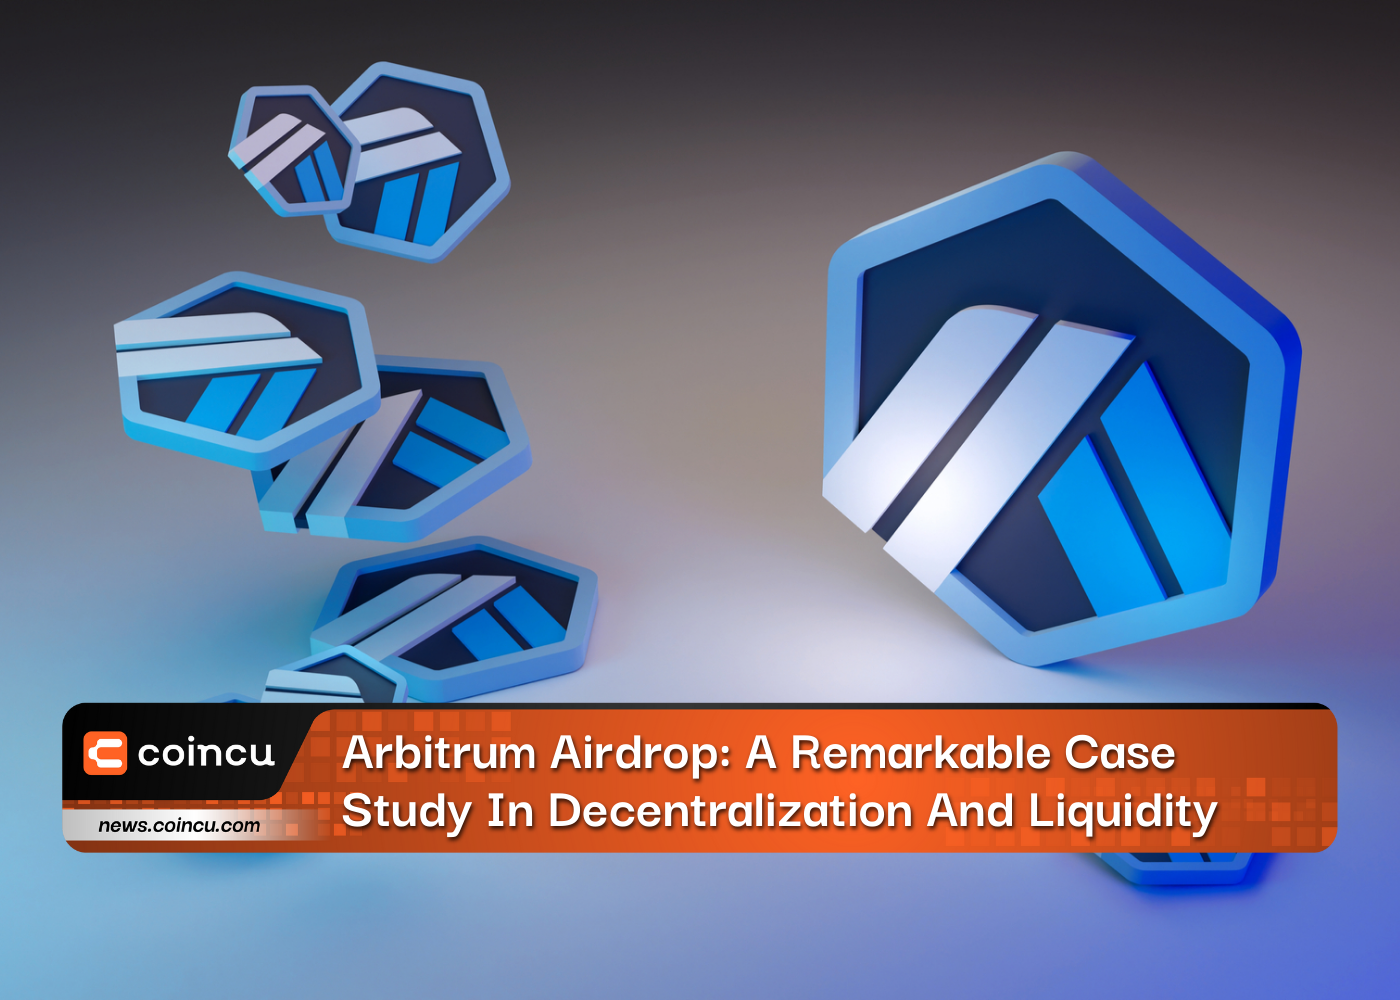 Arbitrum Airdrop: A Remarkable Case Study In Decentralization And Liquidity